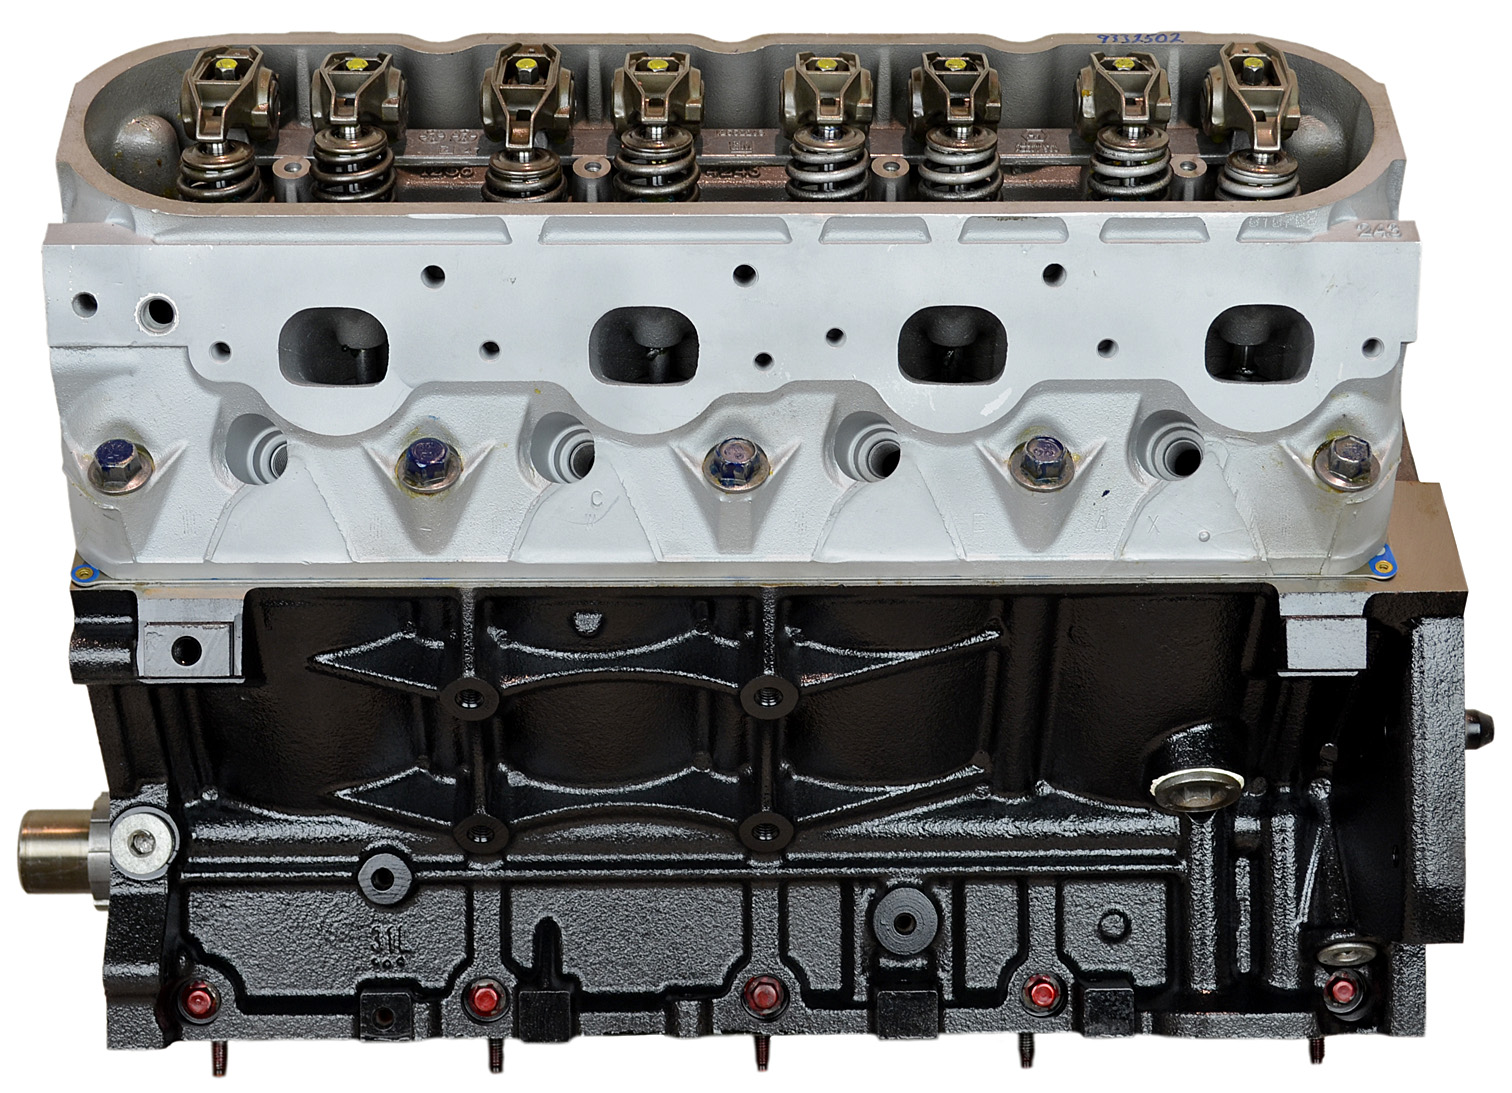 Chevy 5.3L LY5 V8 Remanufactured Engine - 2007-2009